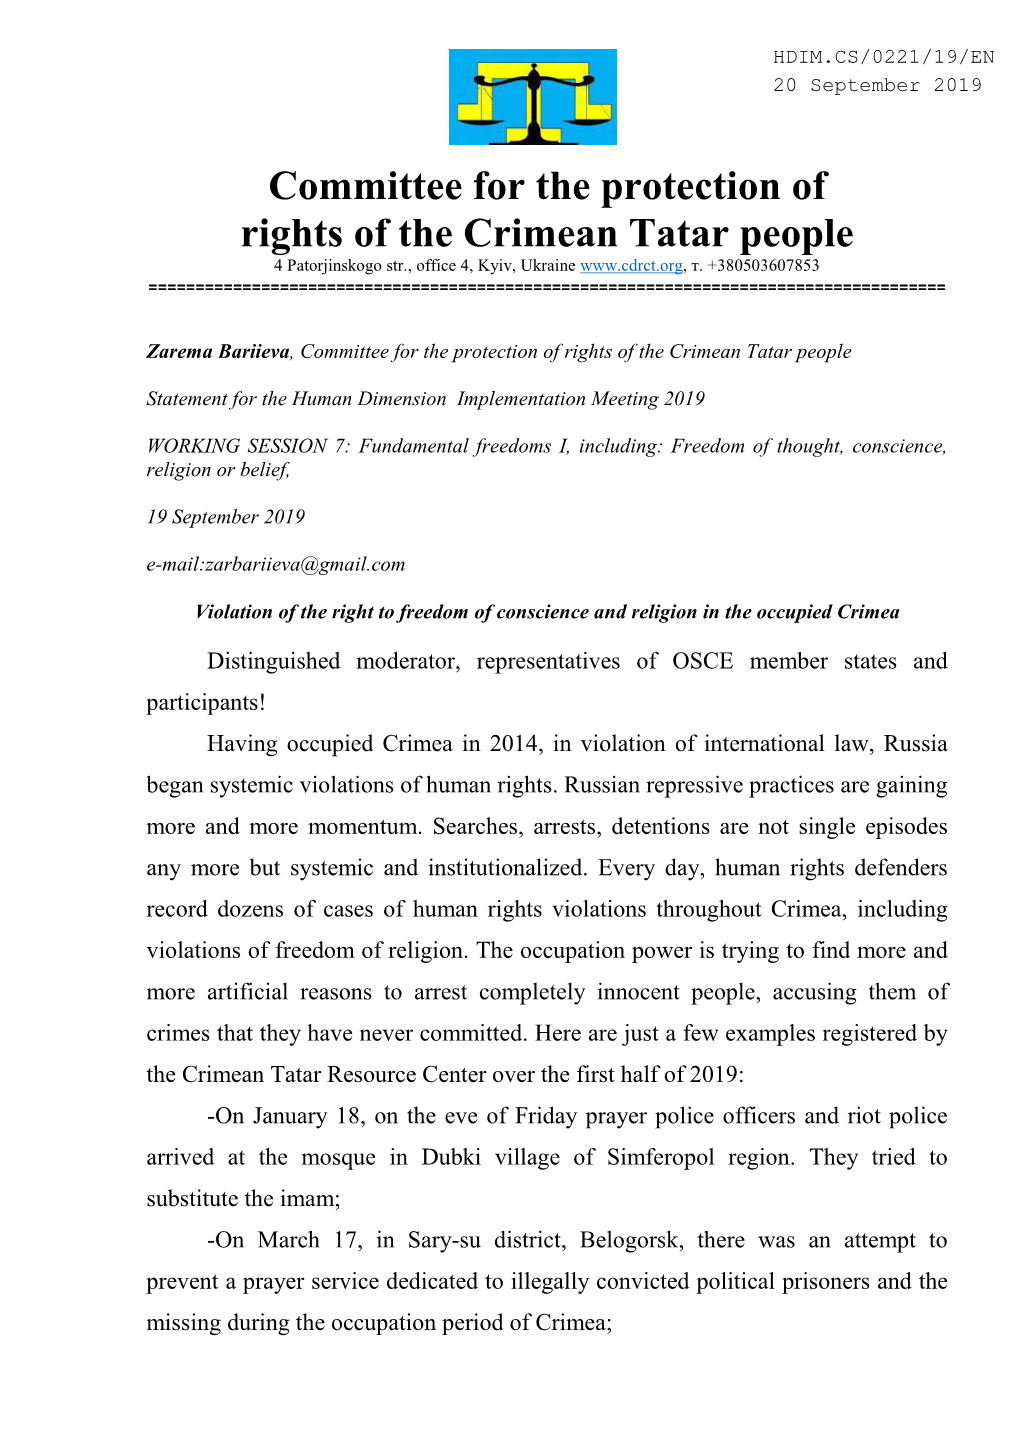 Committee for the Protection of Rights of the Crimean Tatar People 4 Patorjinskogo Str., Office 4, Kyiv, Ukraine Т